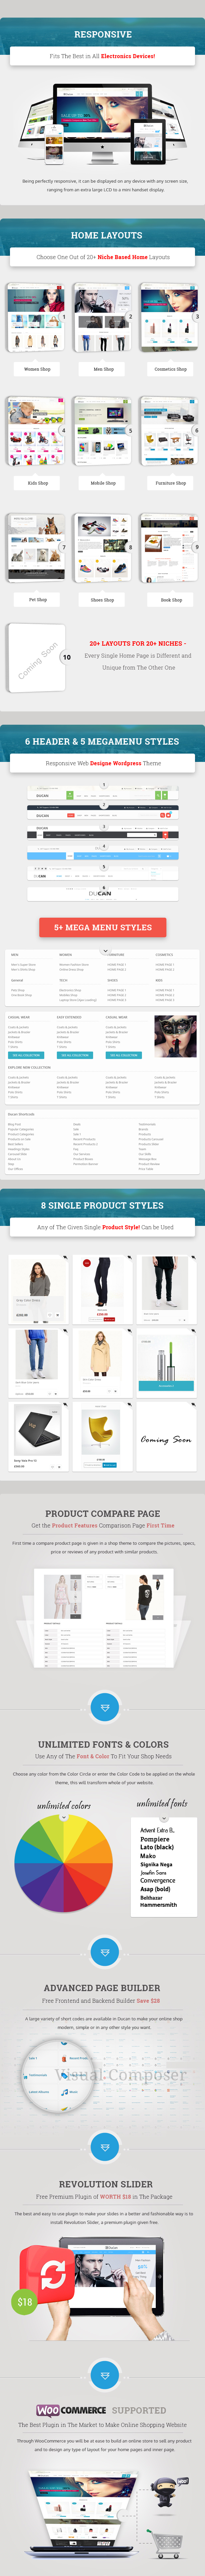 Ducan - Start An Online Store with WooCommerce WP Theme - 2